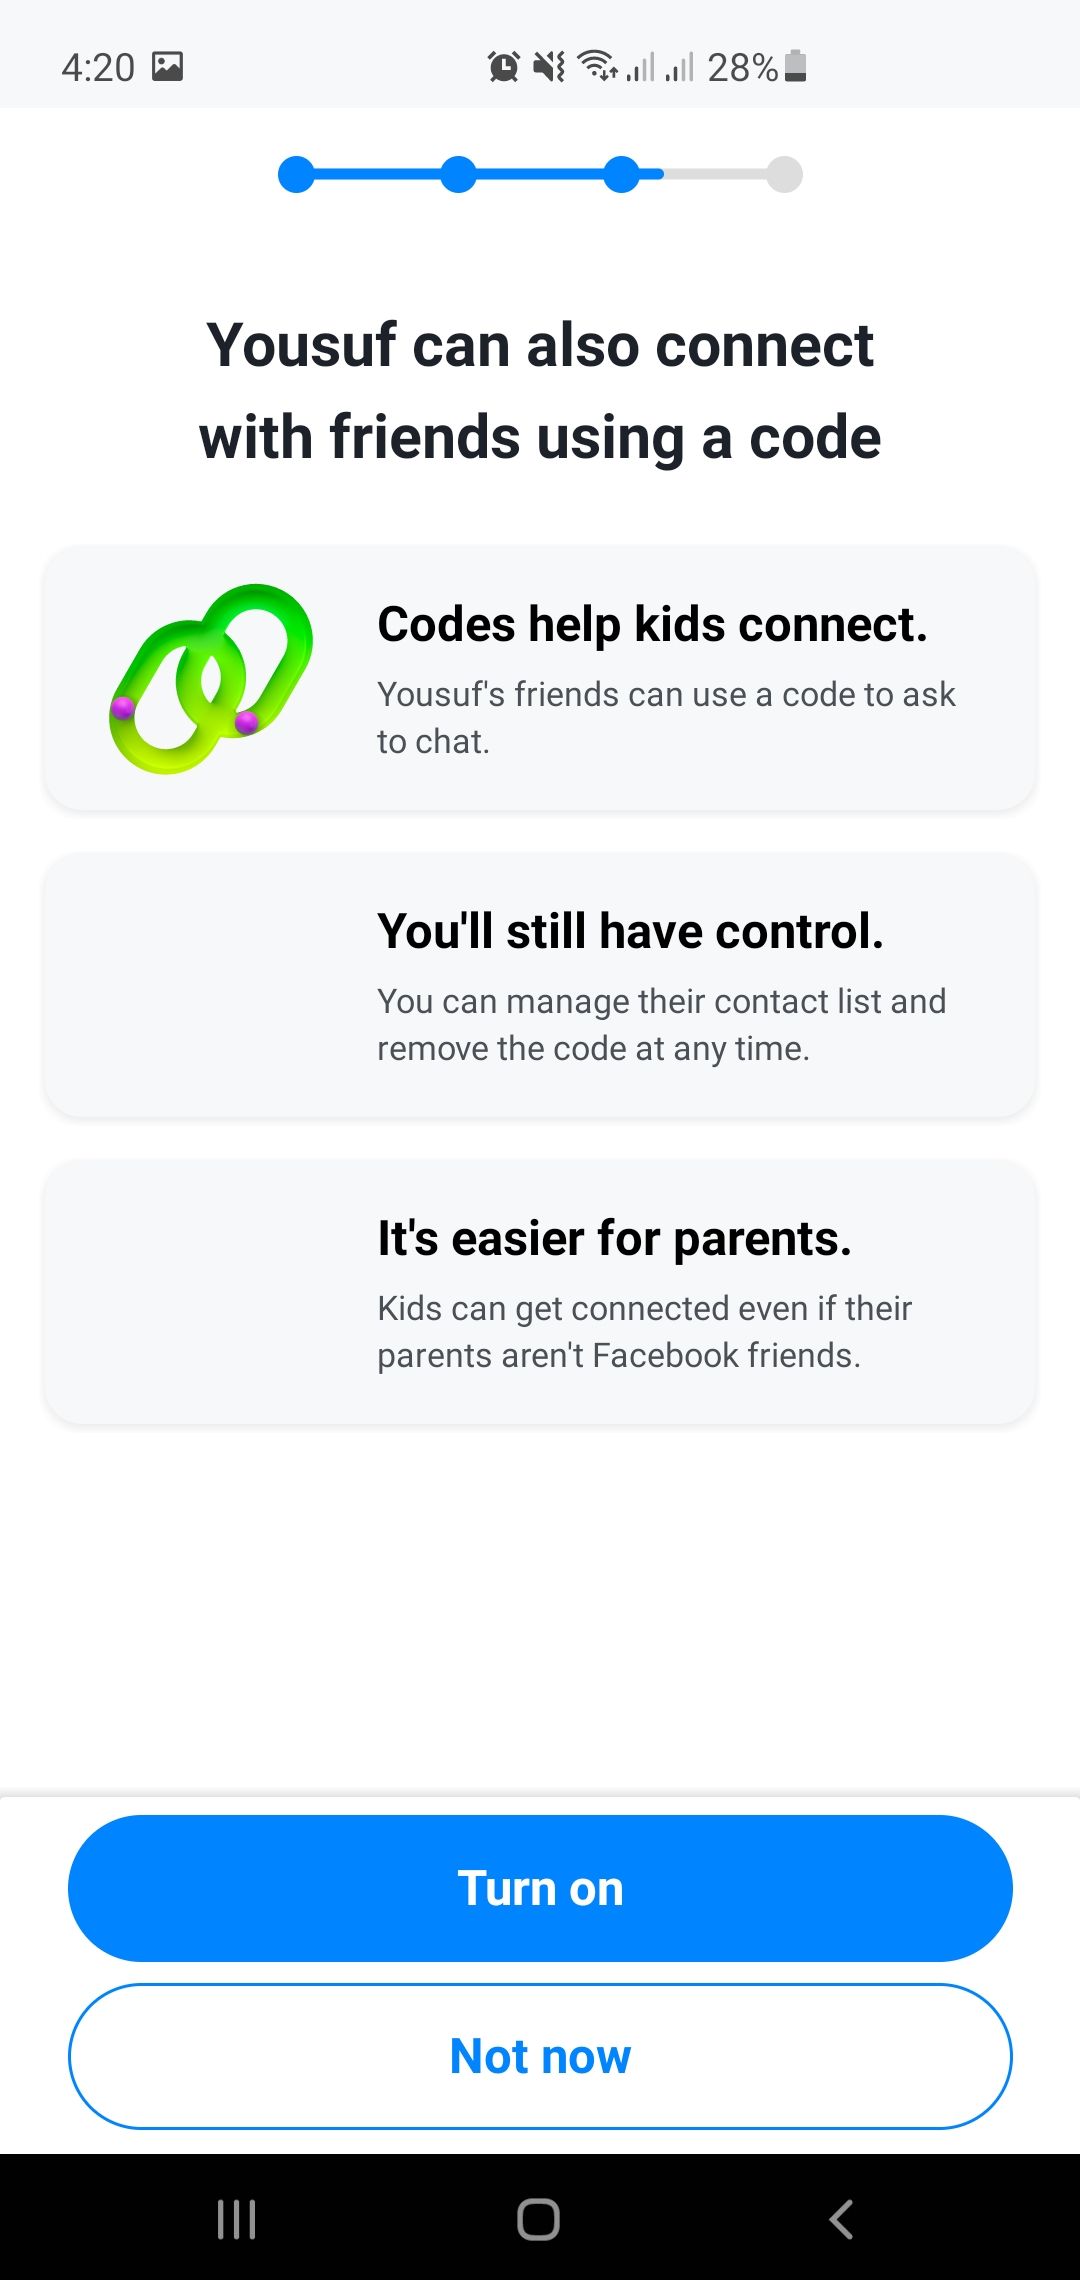 Connect with friends using a code